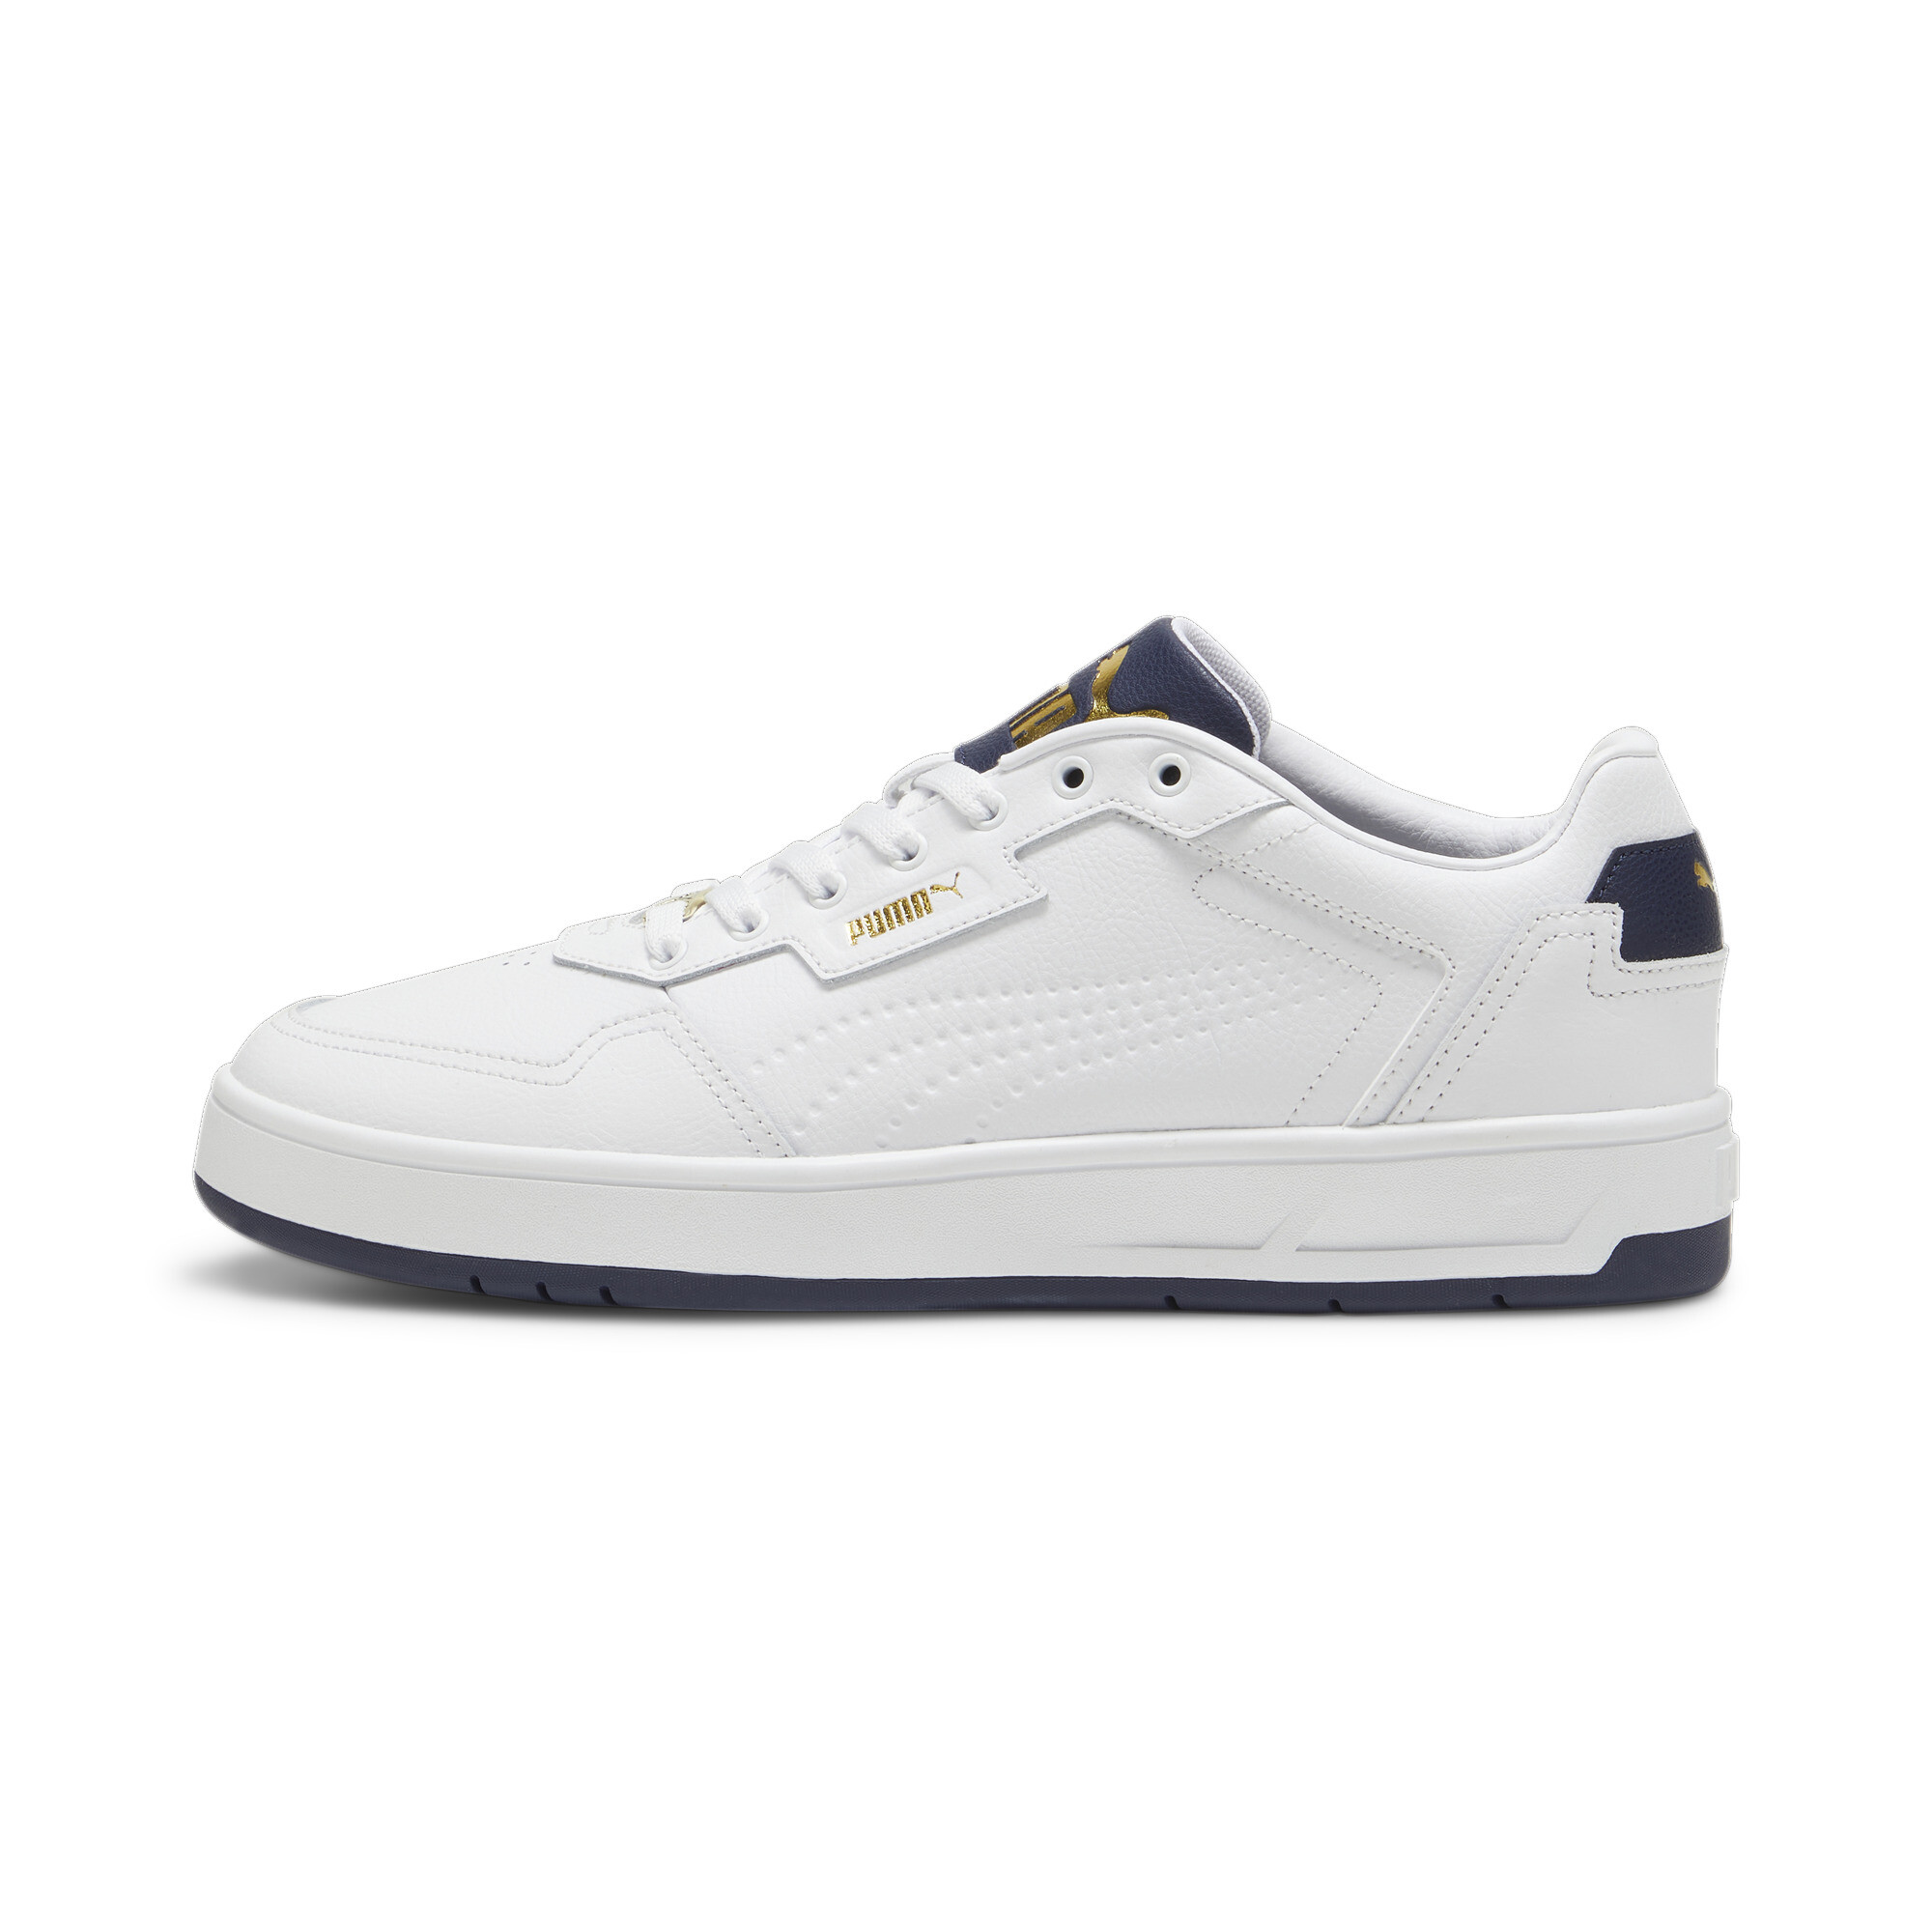 Puma Court Classic Lux Sneakers, White, Size 39, Shoes